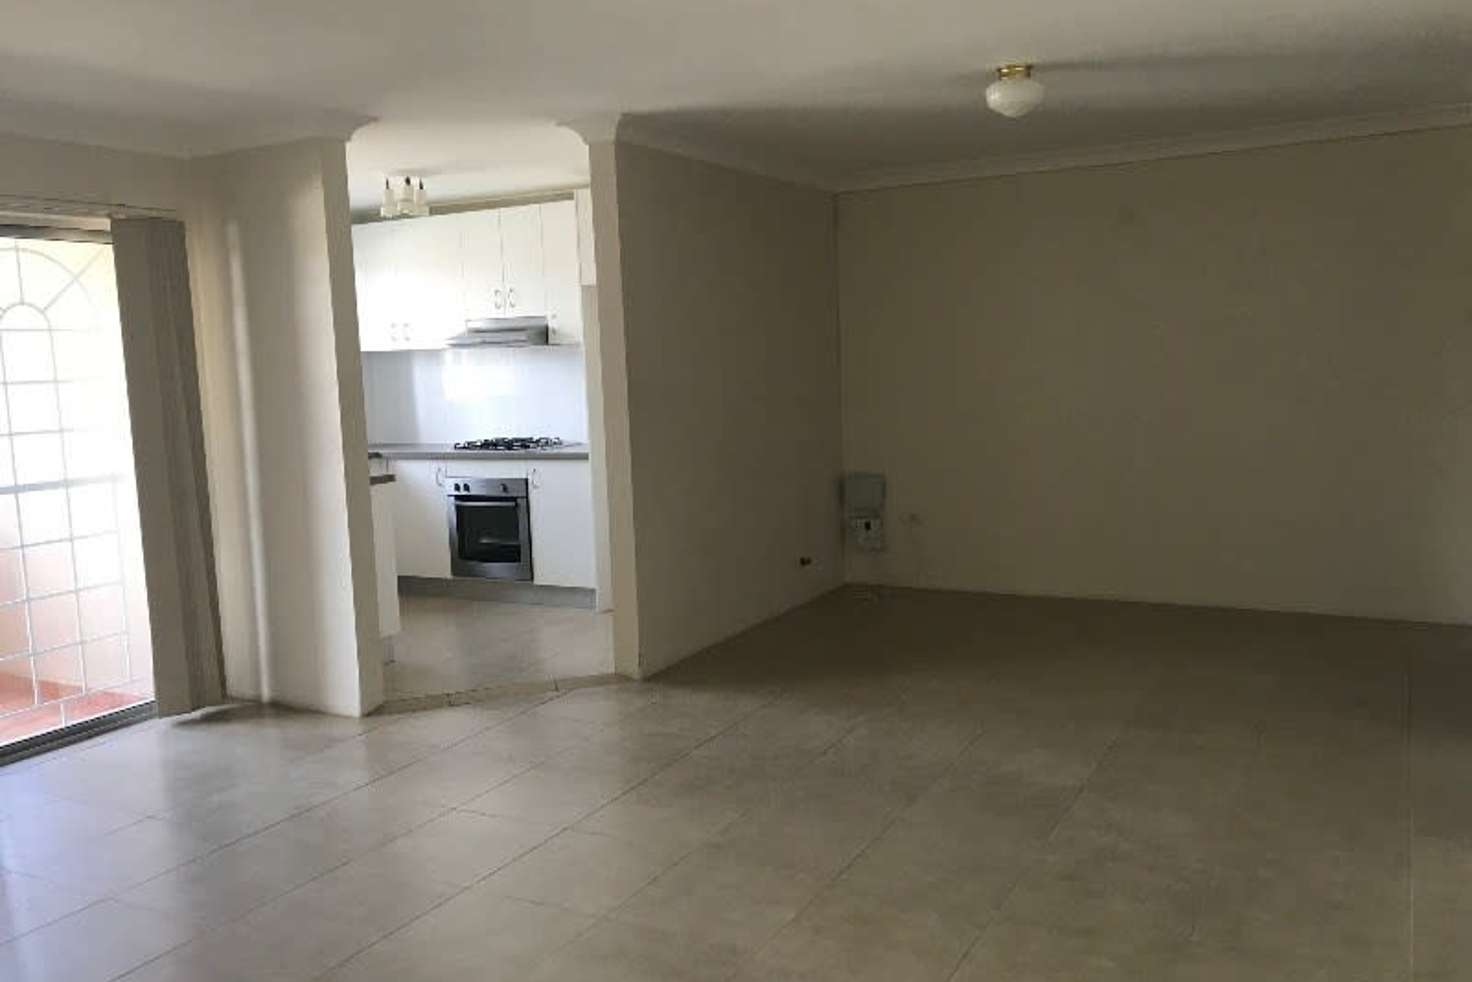 Main view of Homely unit listing, 6/53-55 Bathurst St, Liverpool, Liverpool NSW 2170